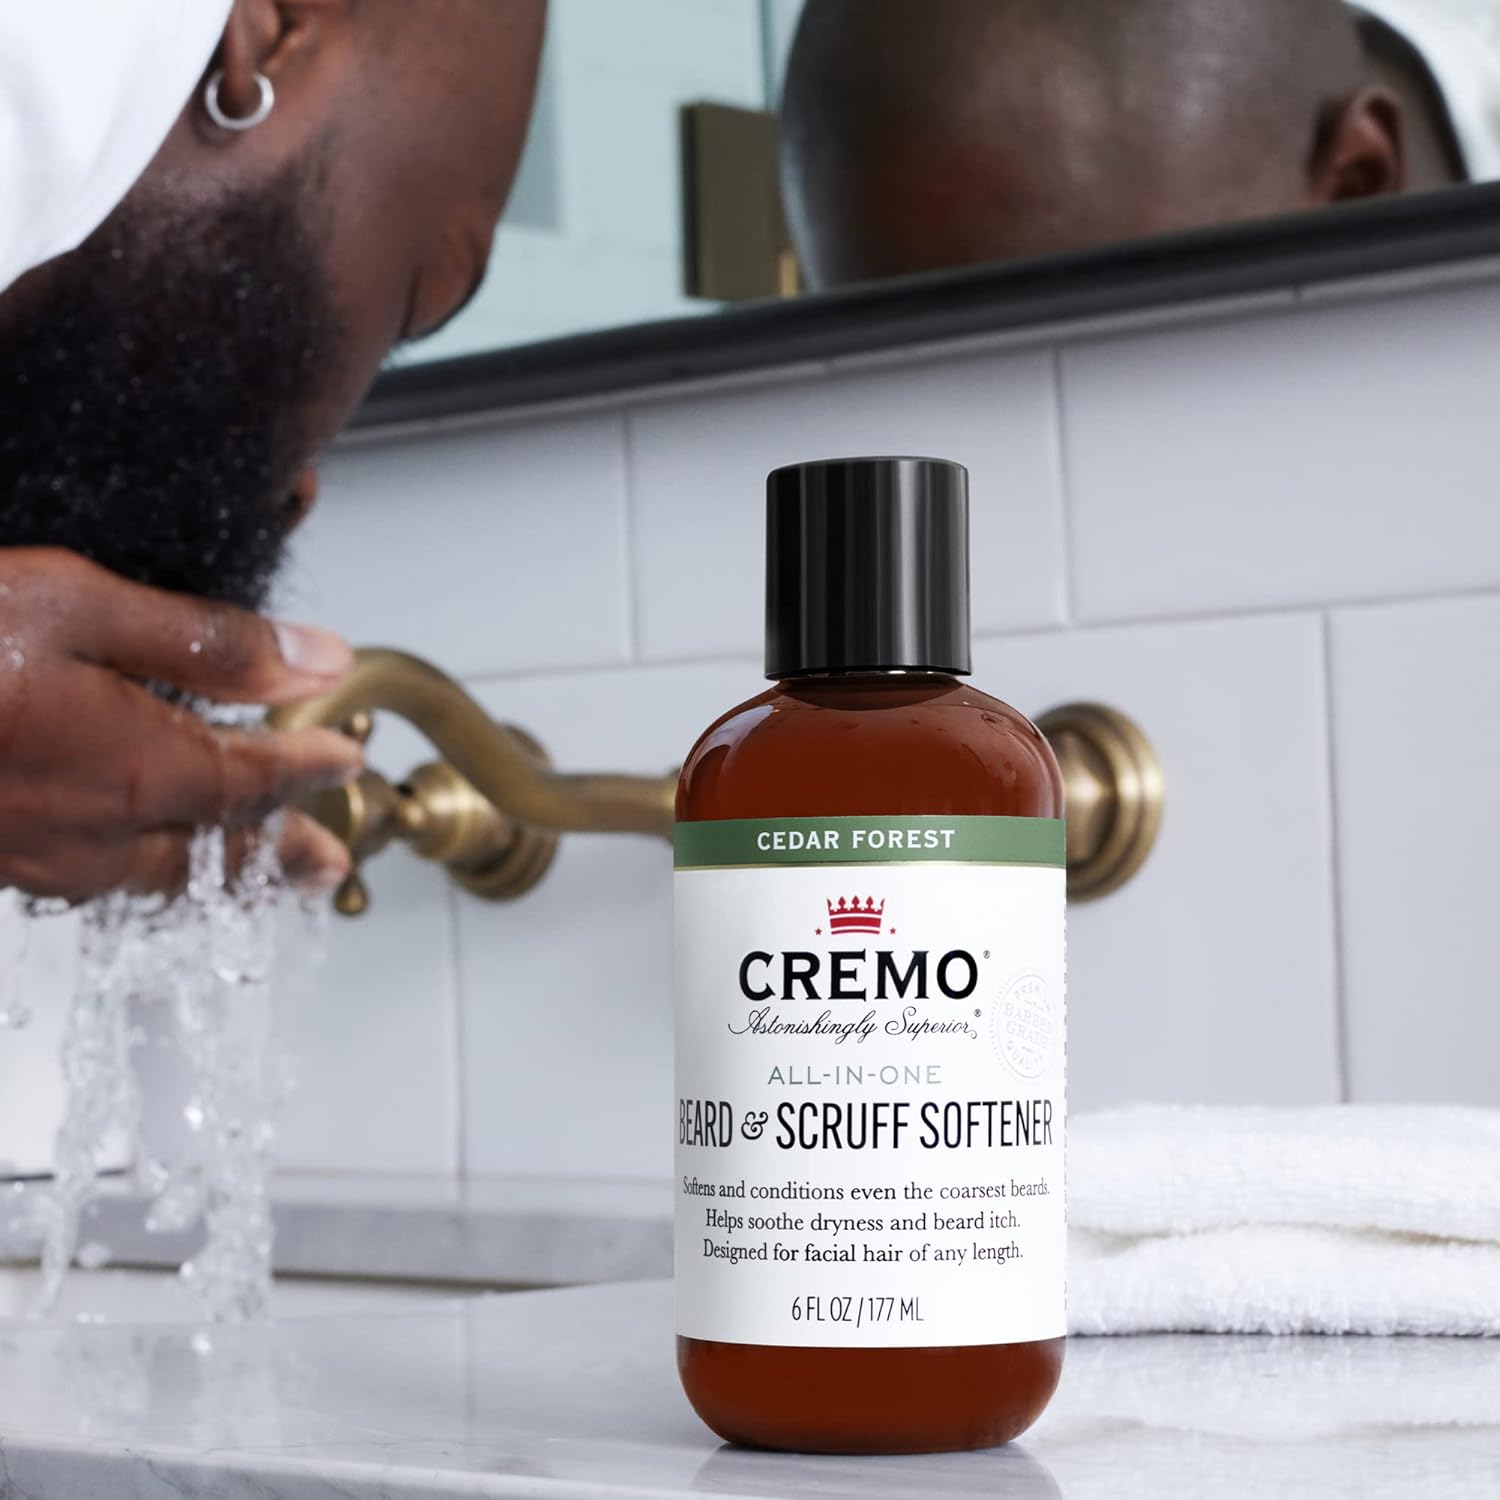 Cremo Cedar Forest Beard & Scruff Softener, Softens and Conditions Coarse Facial Hair of all Lengths in Just 30 Seconds, 6 Fluid Ounce : Beauty & Personal Care